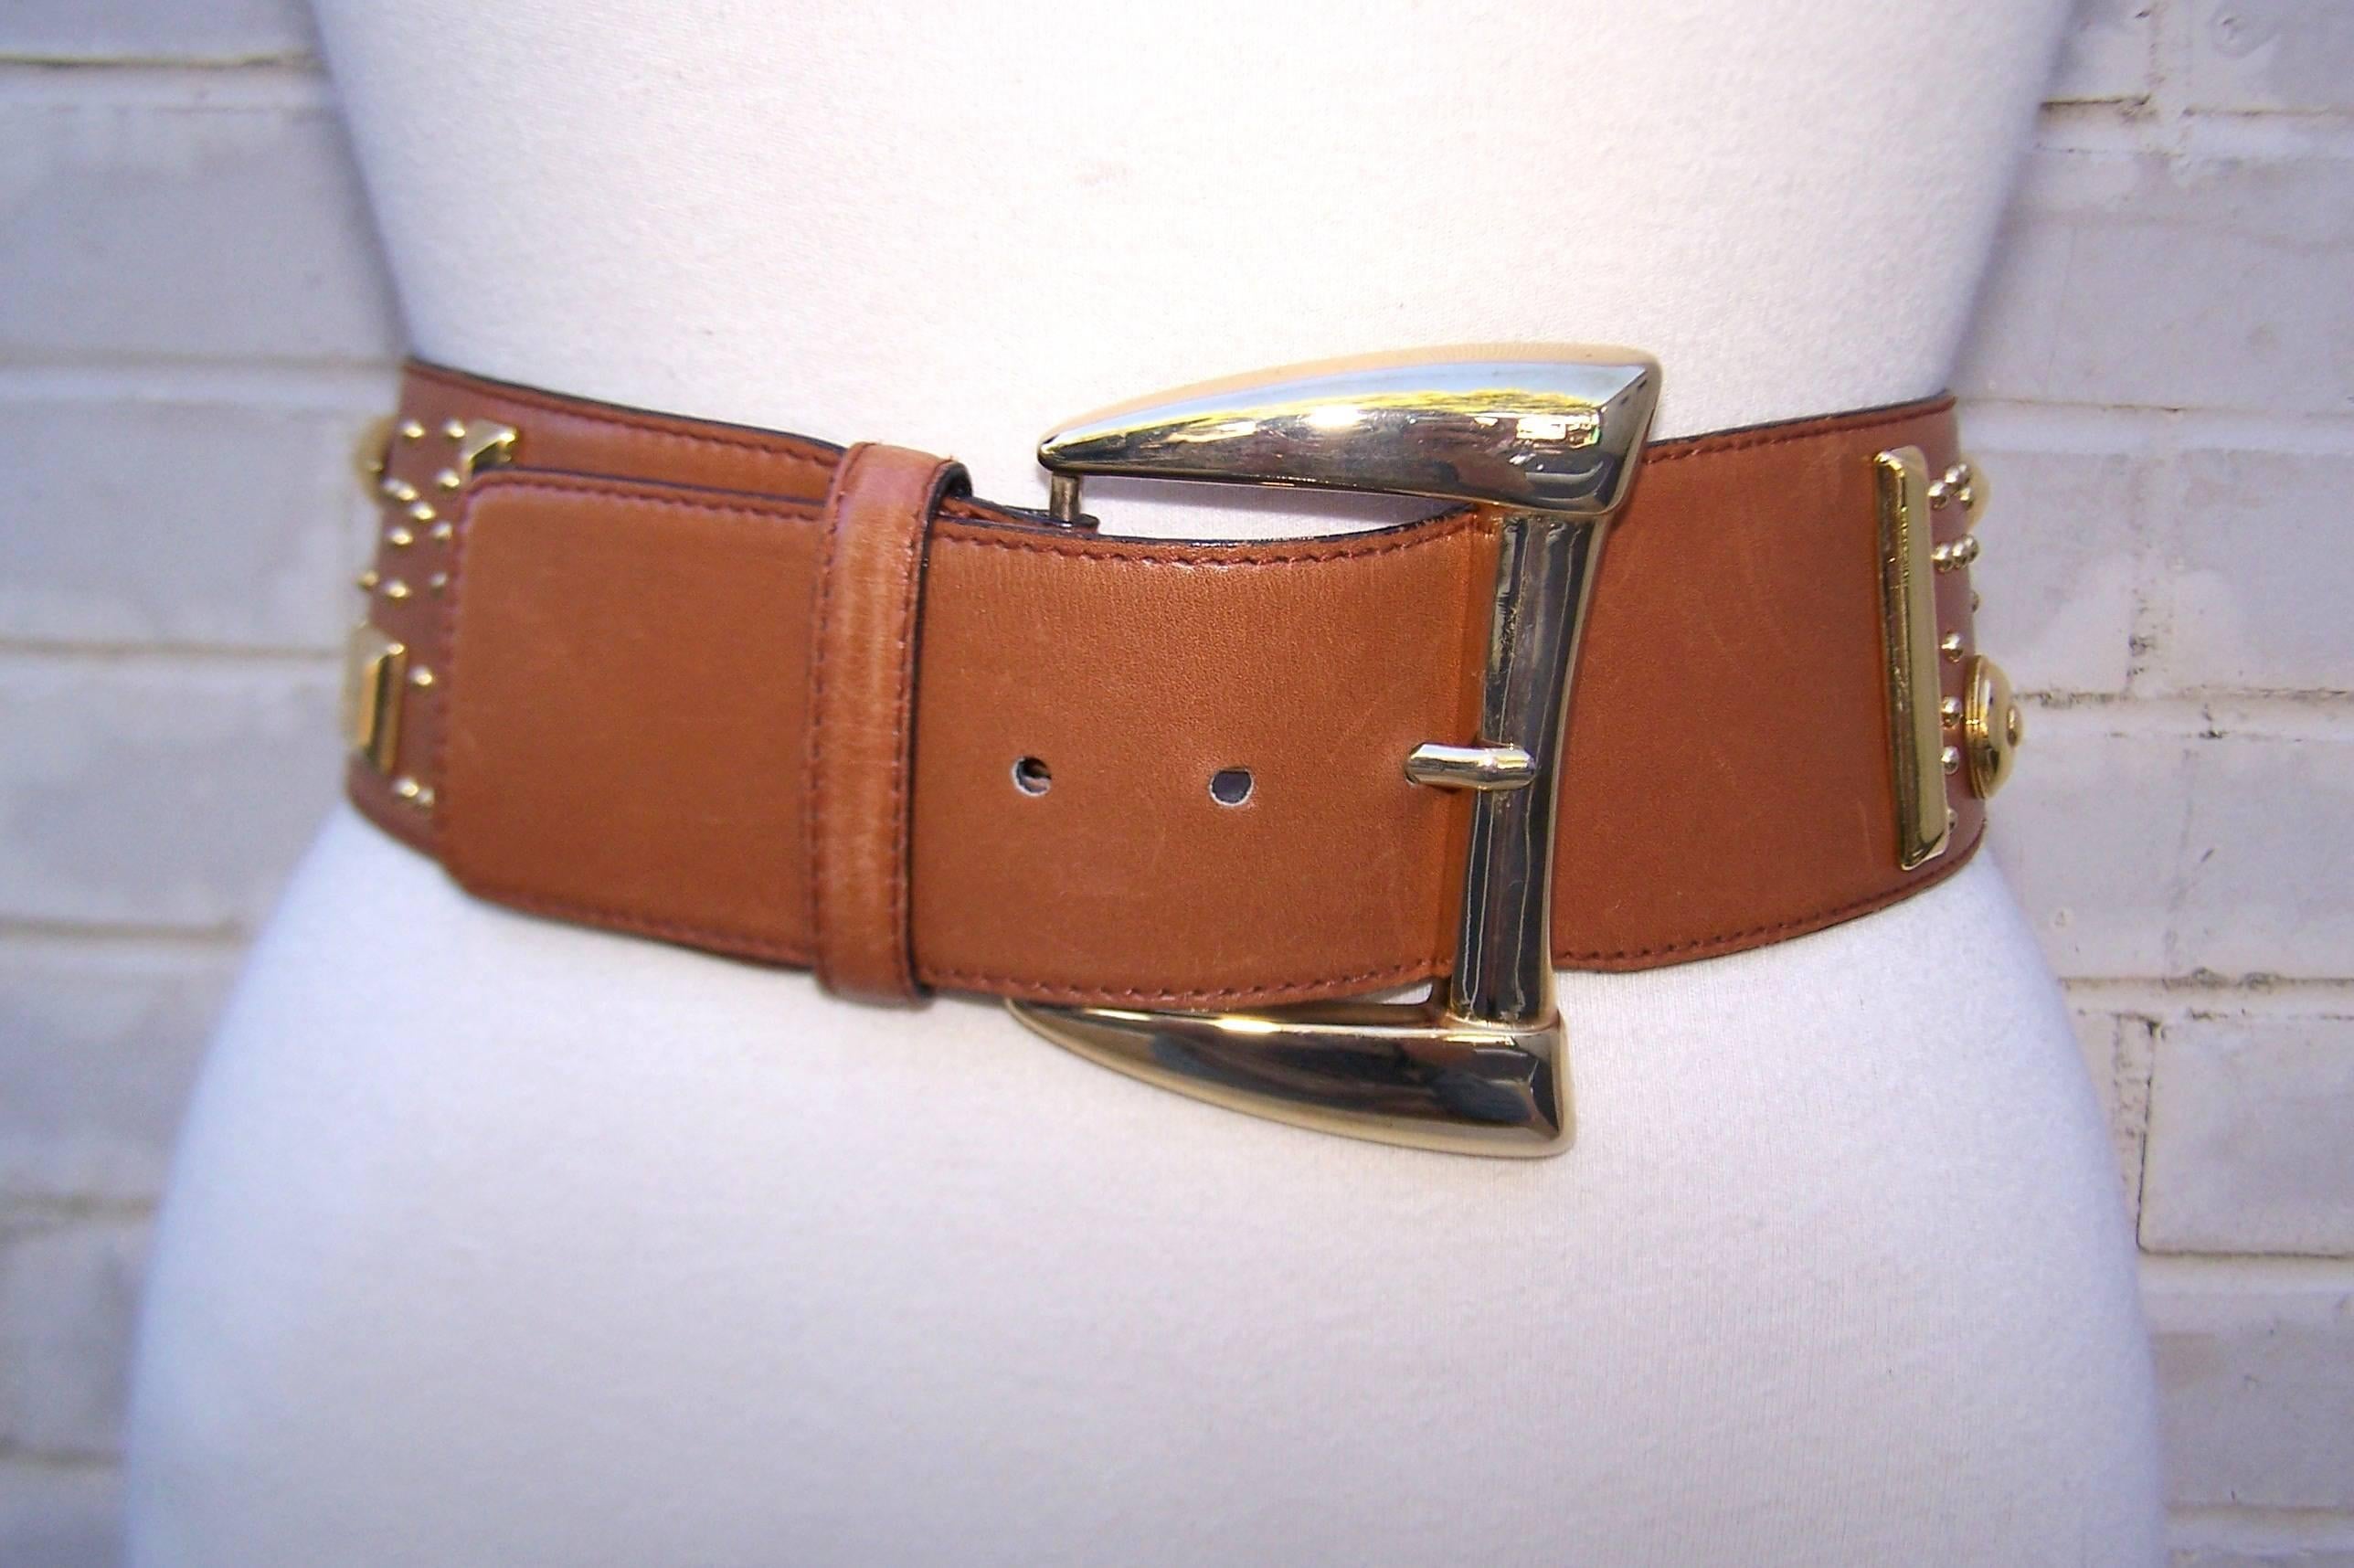 This Escada belt means business!  The neutral camel color leather looks great paired with many other shades and the addition of the gold studs in geometric shapes lends the belt a funky vibe sure to spice up an outfit.  Dresses, trousers or the